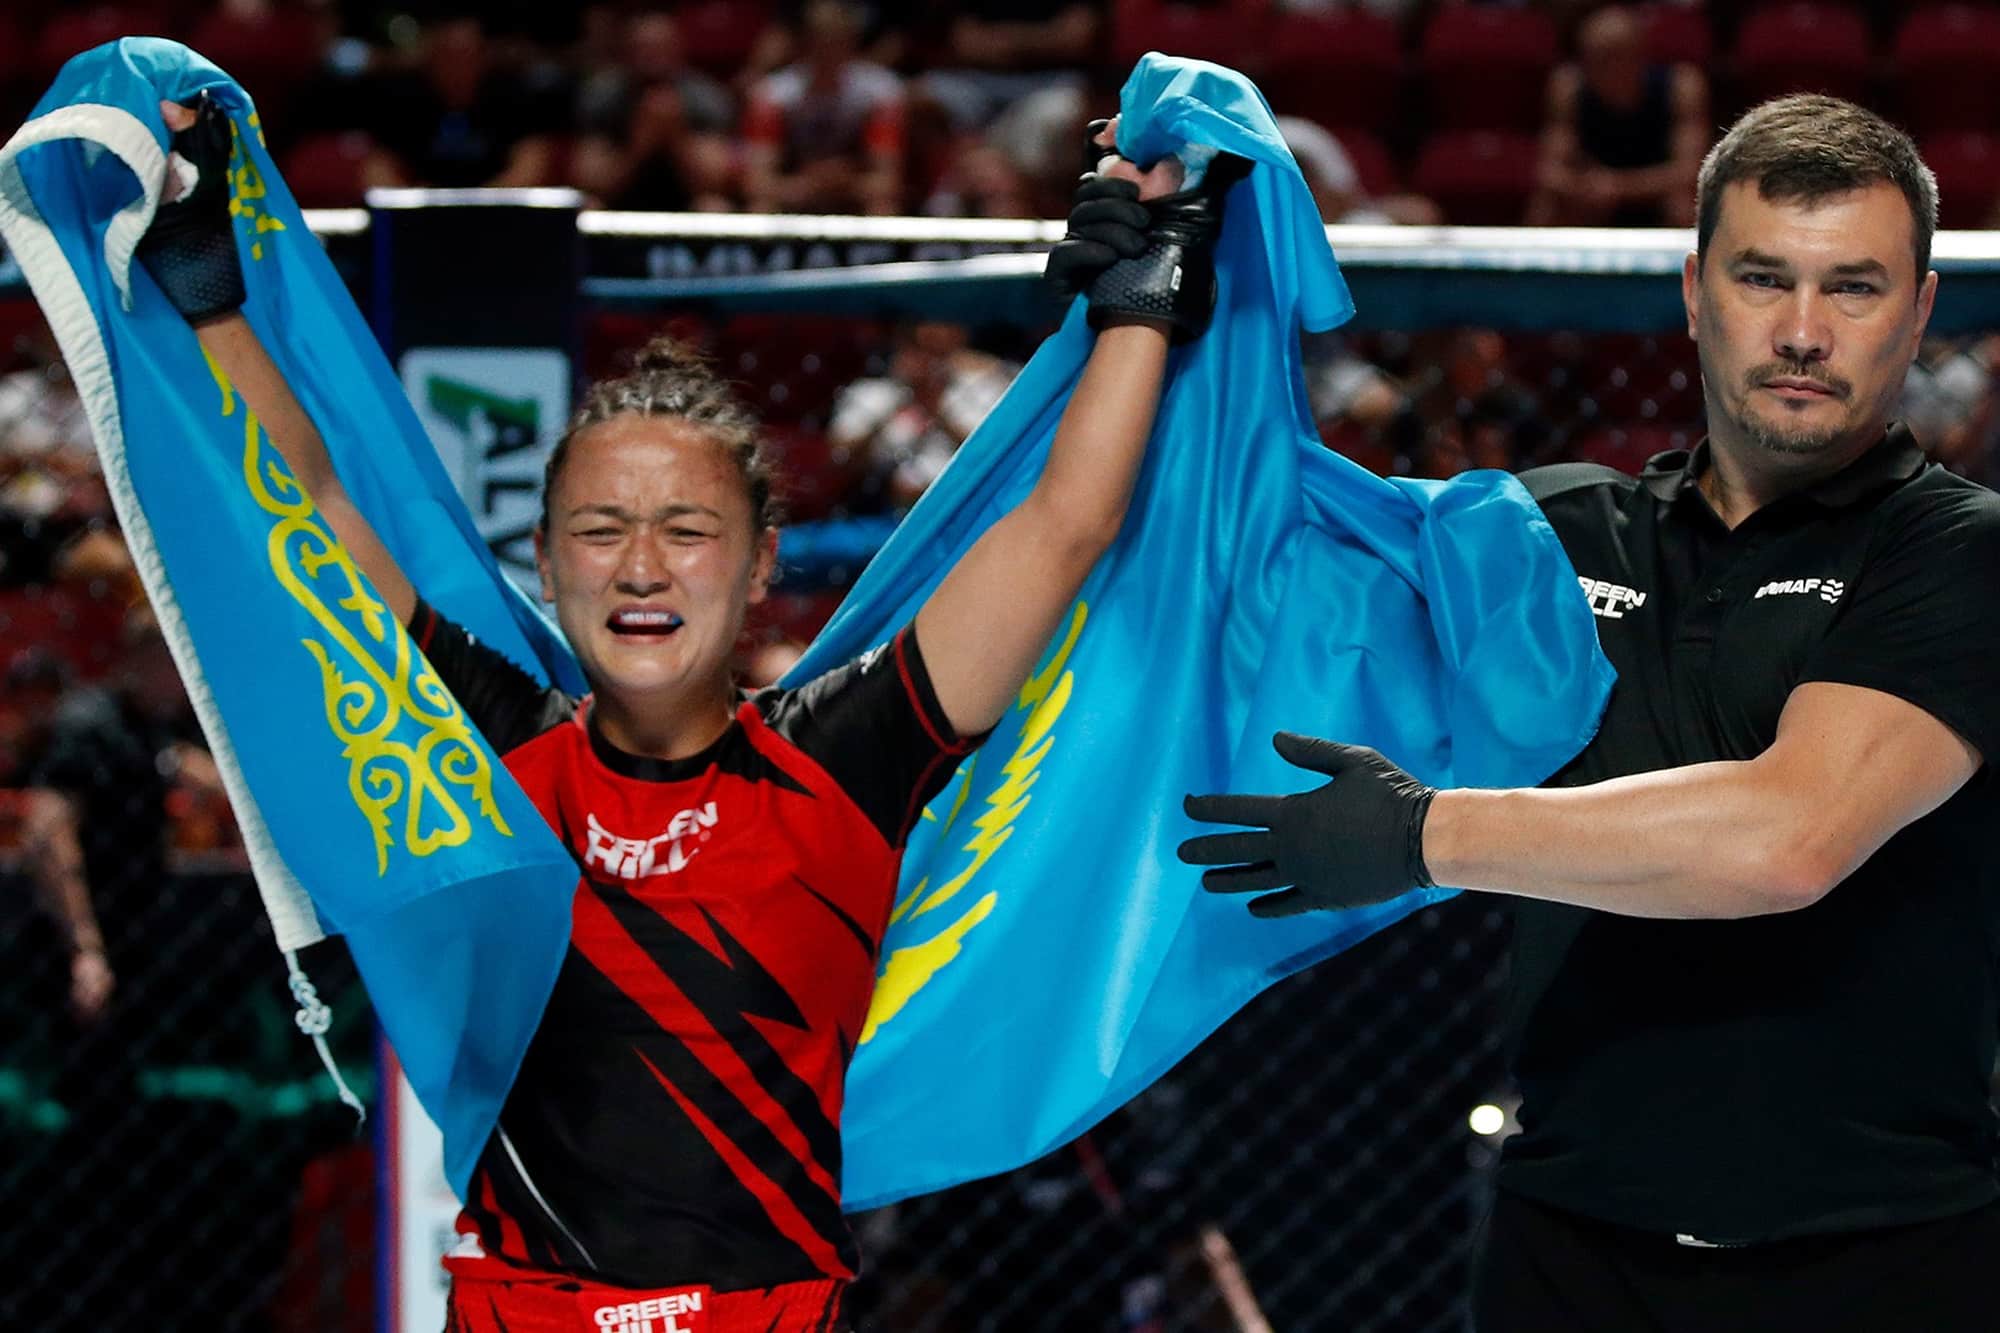 Ayan Tursyn Set for Pro Ranks with Dream of Becoming UFC Champion